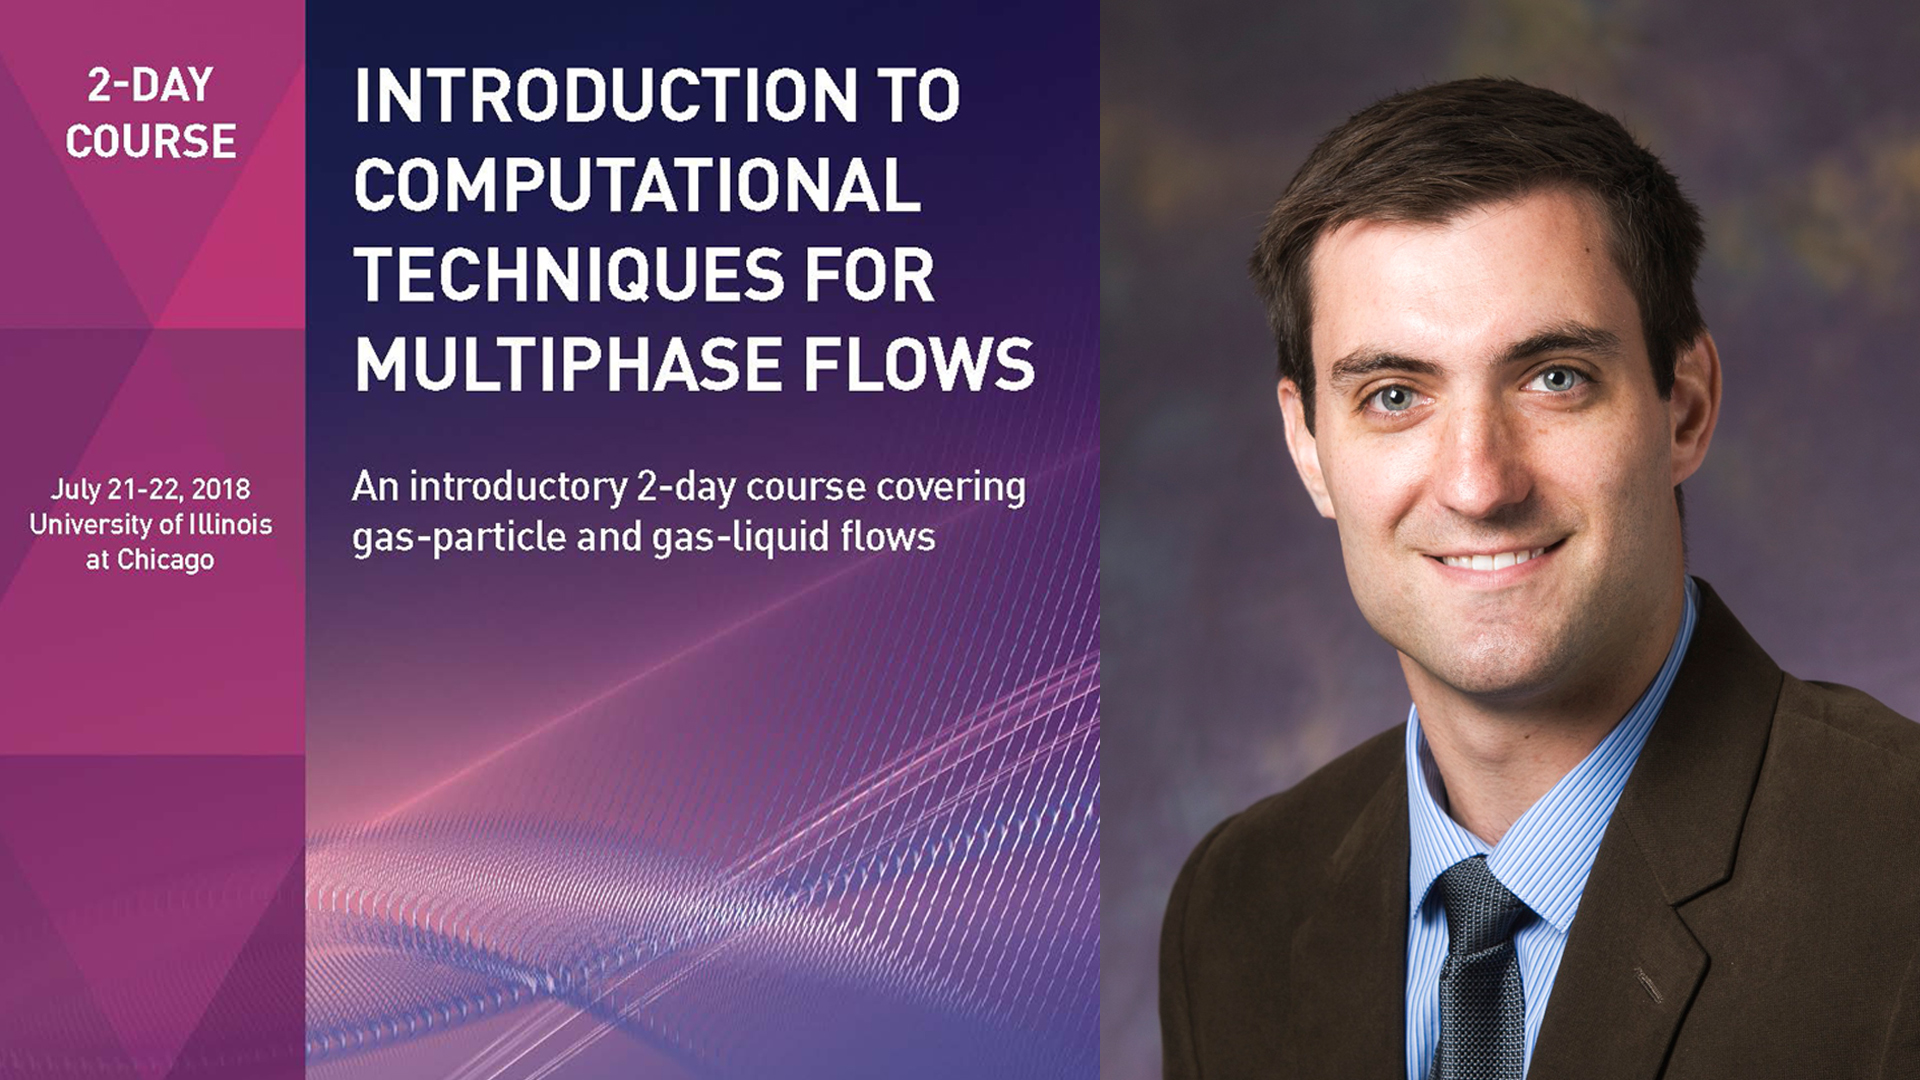 Brooks to instruct on computational multiphase flow for international short course